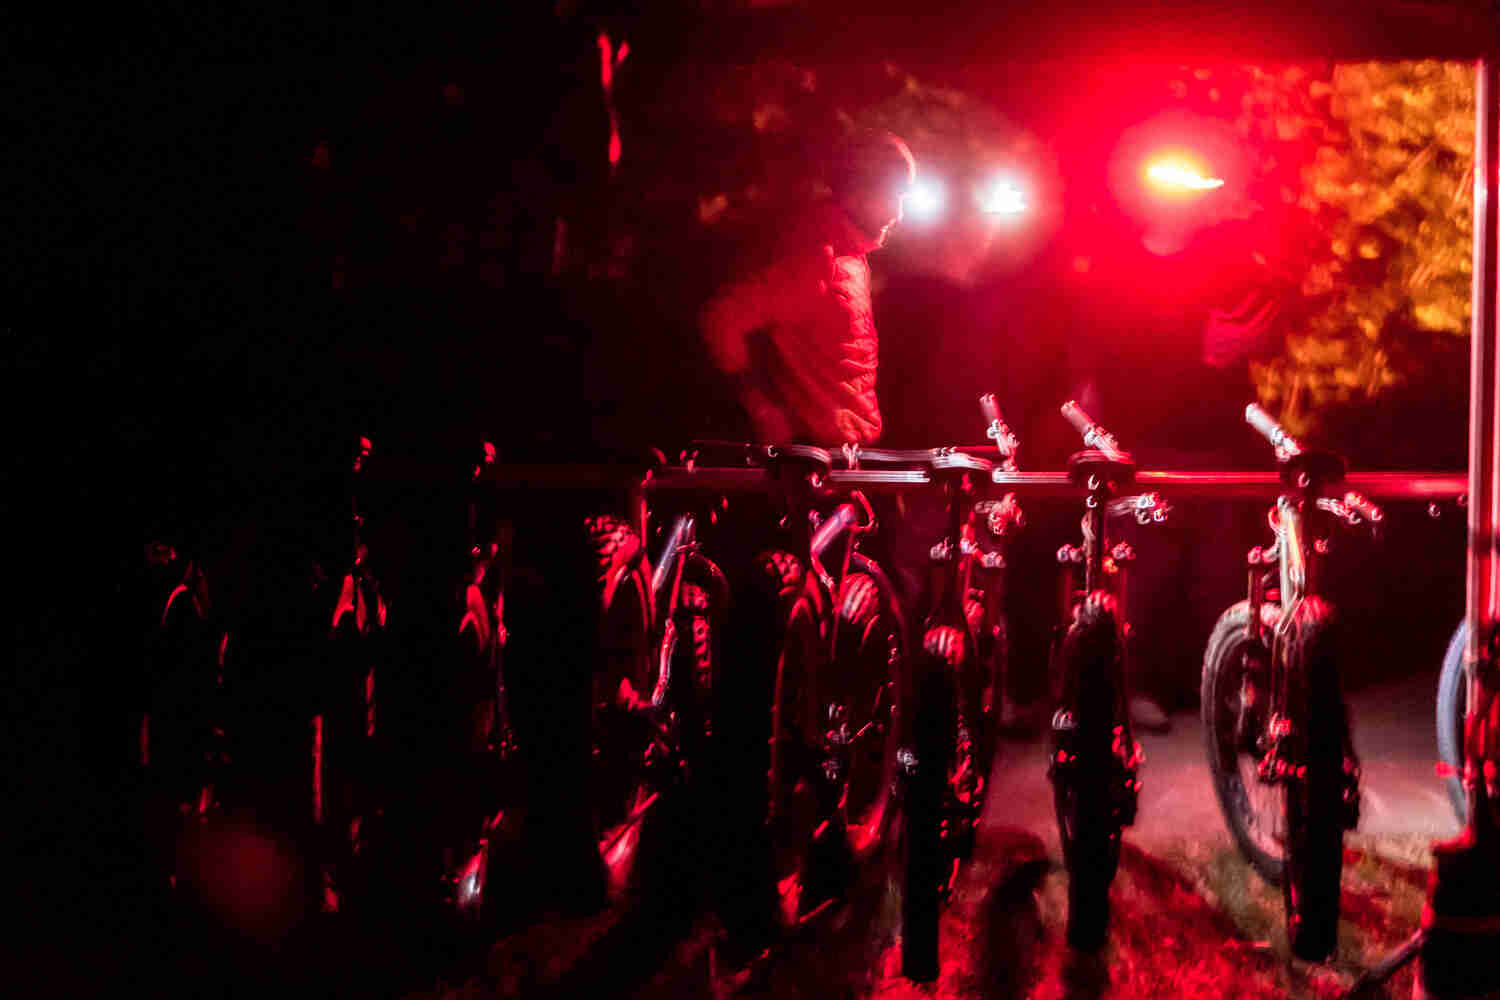 Rear view of a row of Surly fat bikes, at night, with a cyclist standing behind, in a red glow